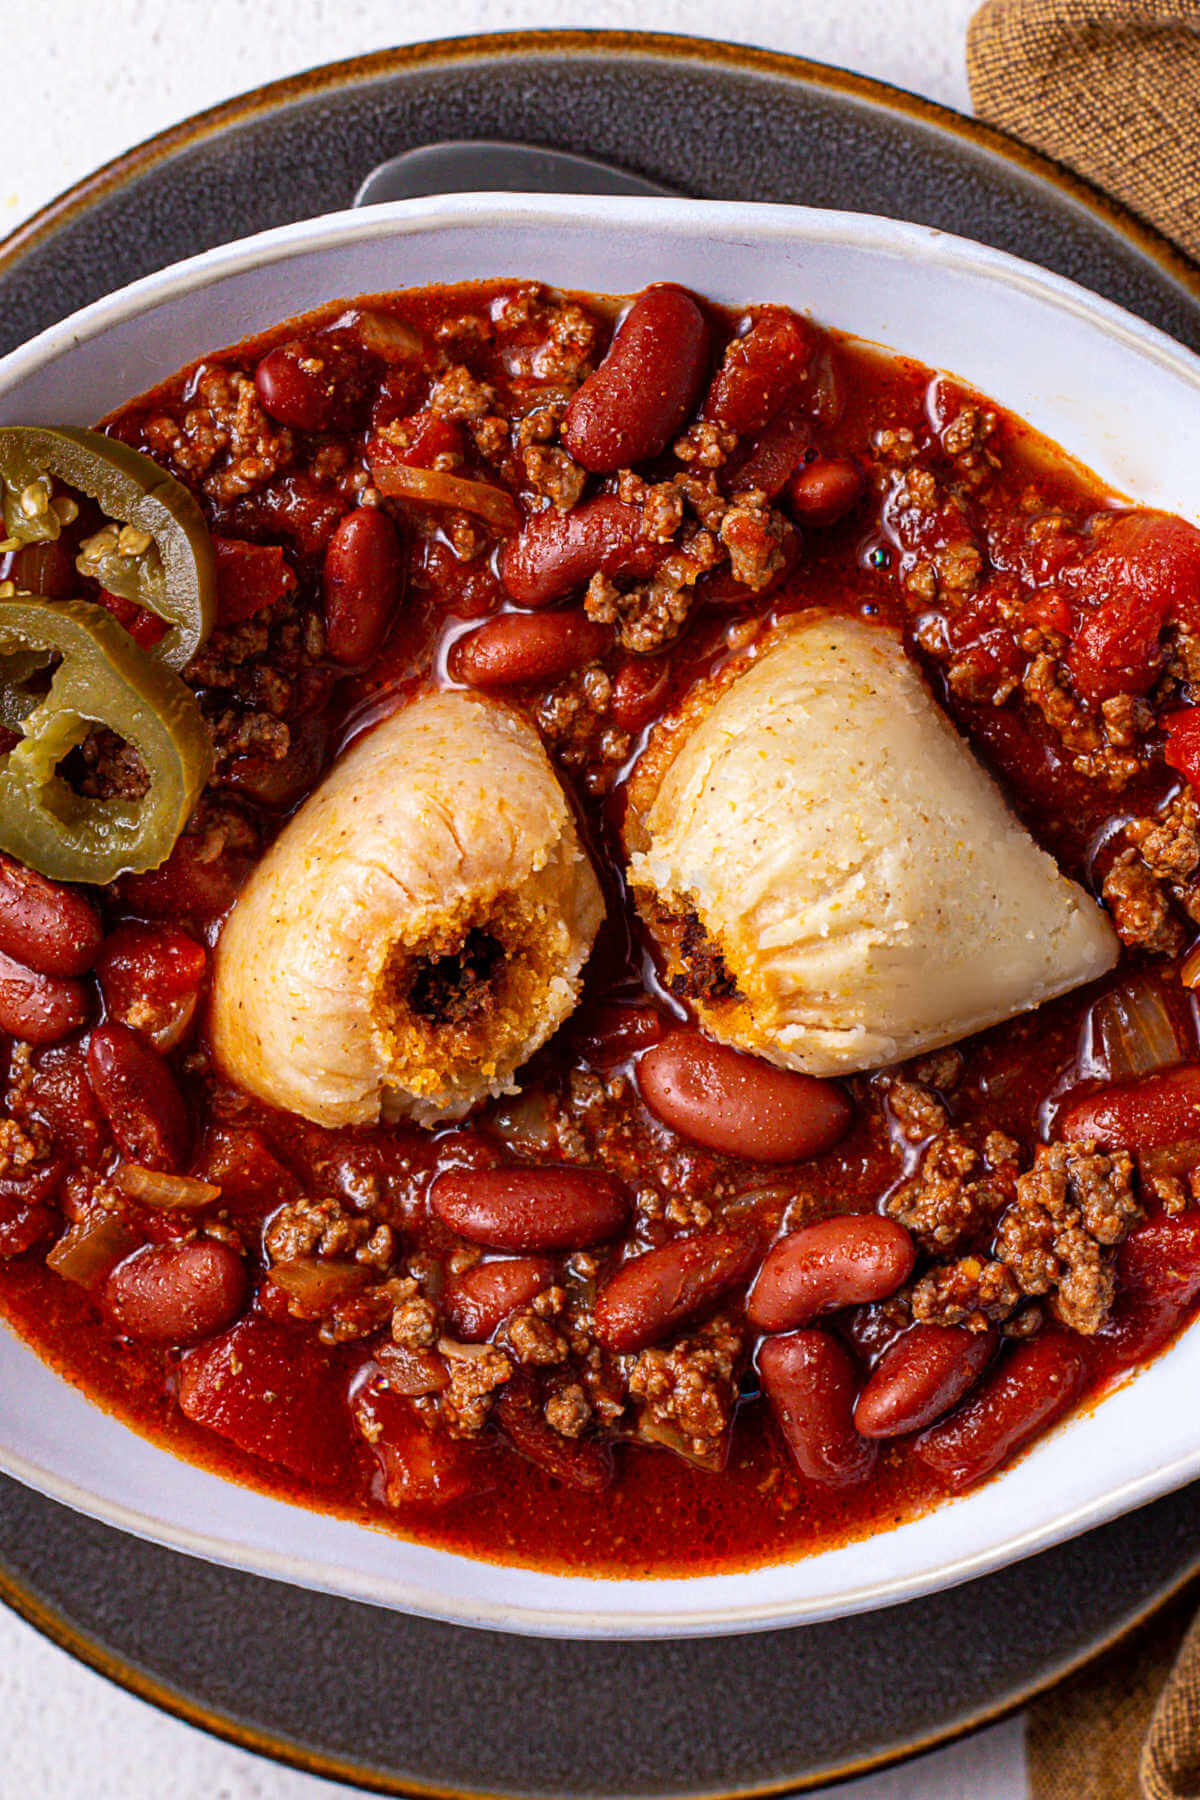 A full house (southern style hot tamales in a bowl of chili) garnished with jalapeno slices on a plate.